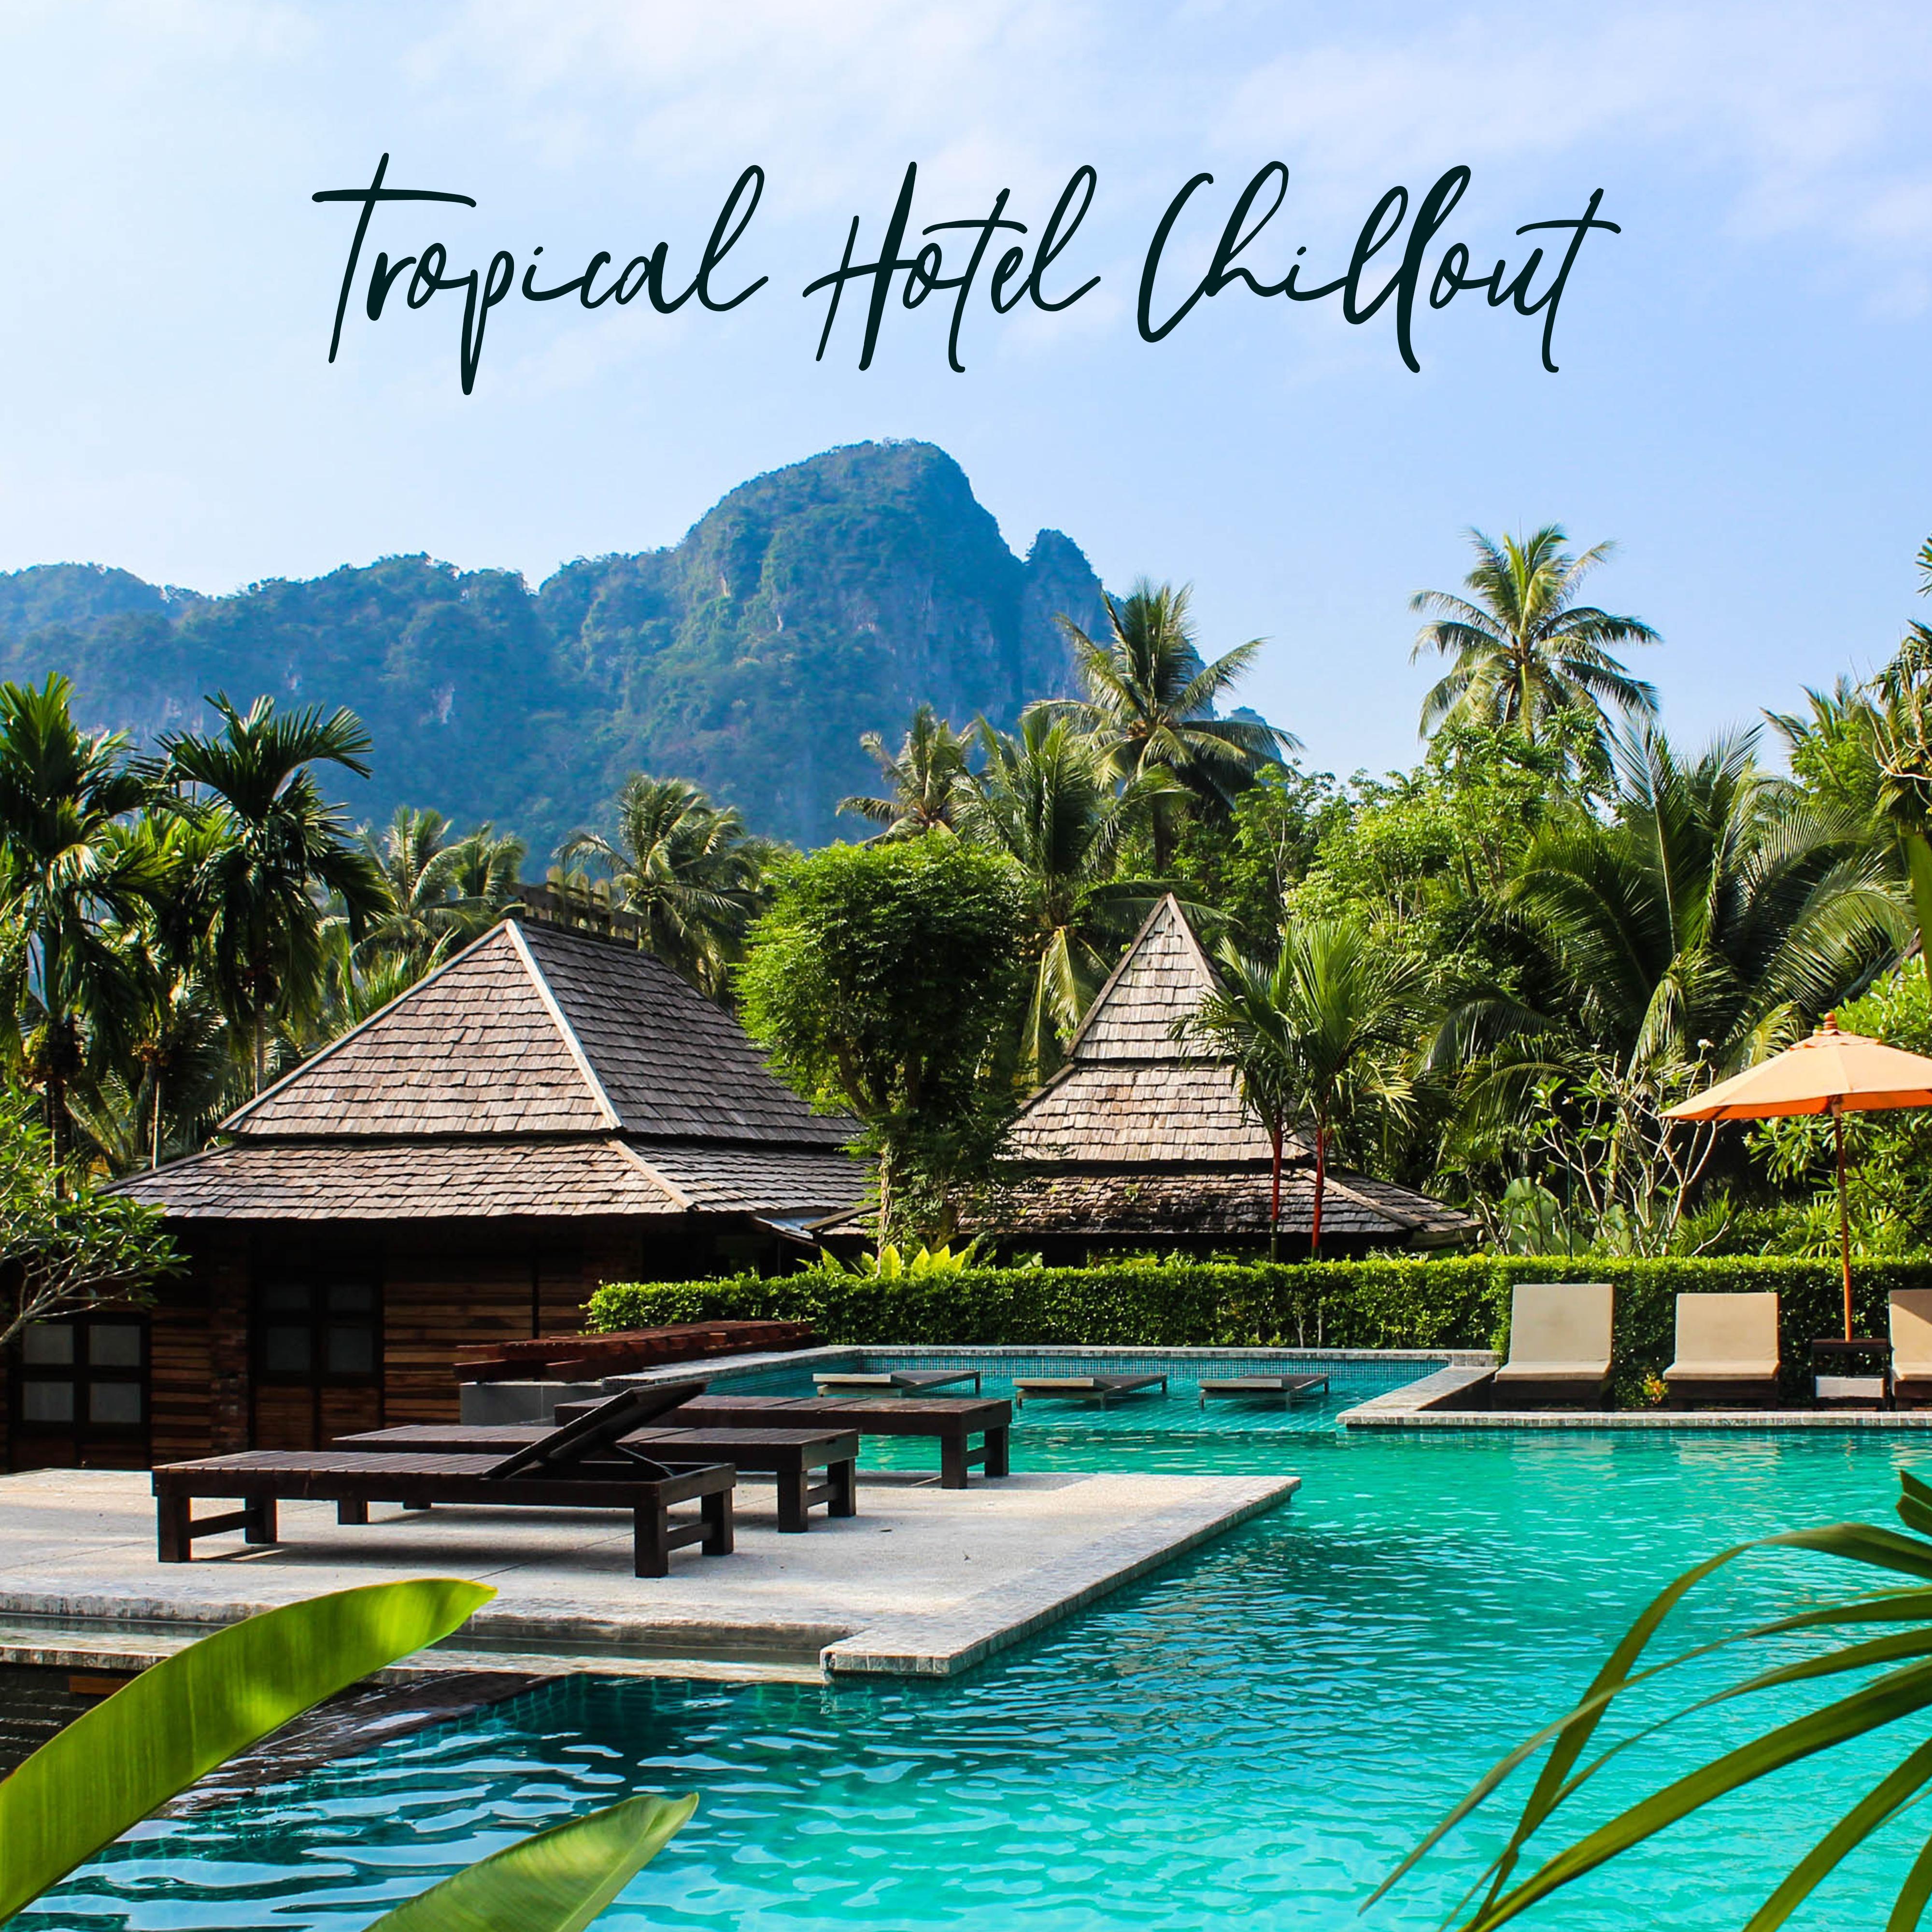 Tropical Hotel Chillout: Ultra Relaxation Chill Out Vibes 2019, Soft Beats & Soothing Ambients for Best Calming Down & Rest by the Seaside, Hot Sunny Beach Rhythms